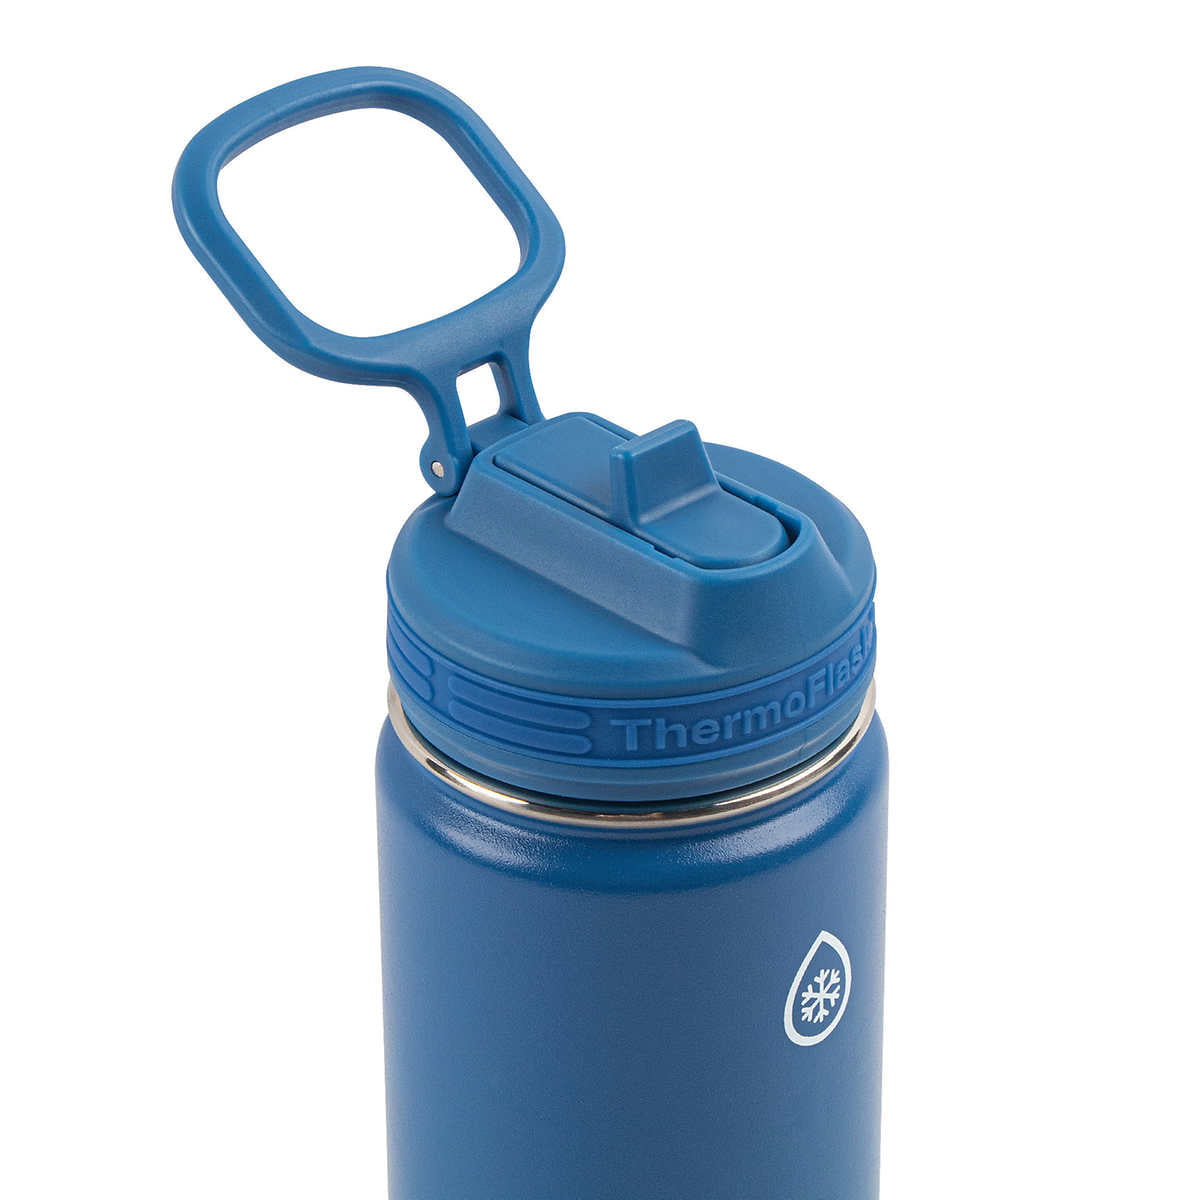 ThermoFlask 16oz Stainless Steel, Vacuum Insulated Water Bottle Blue NWOB